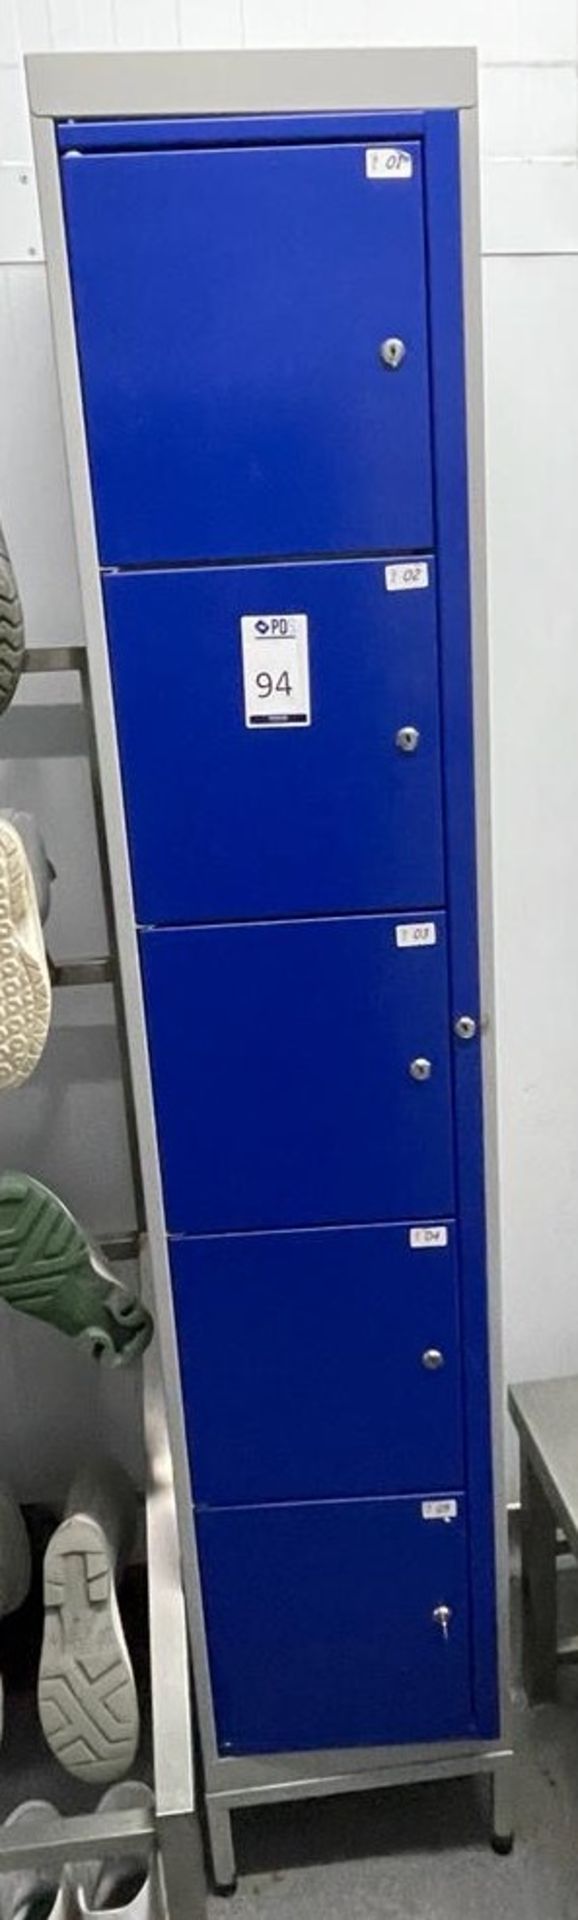 Six Personnel Lockers (Location: NW London. Please Refer to General Notes)